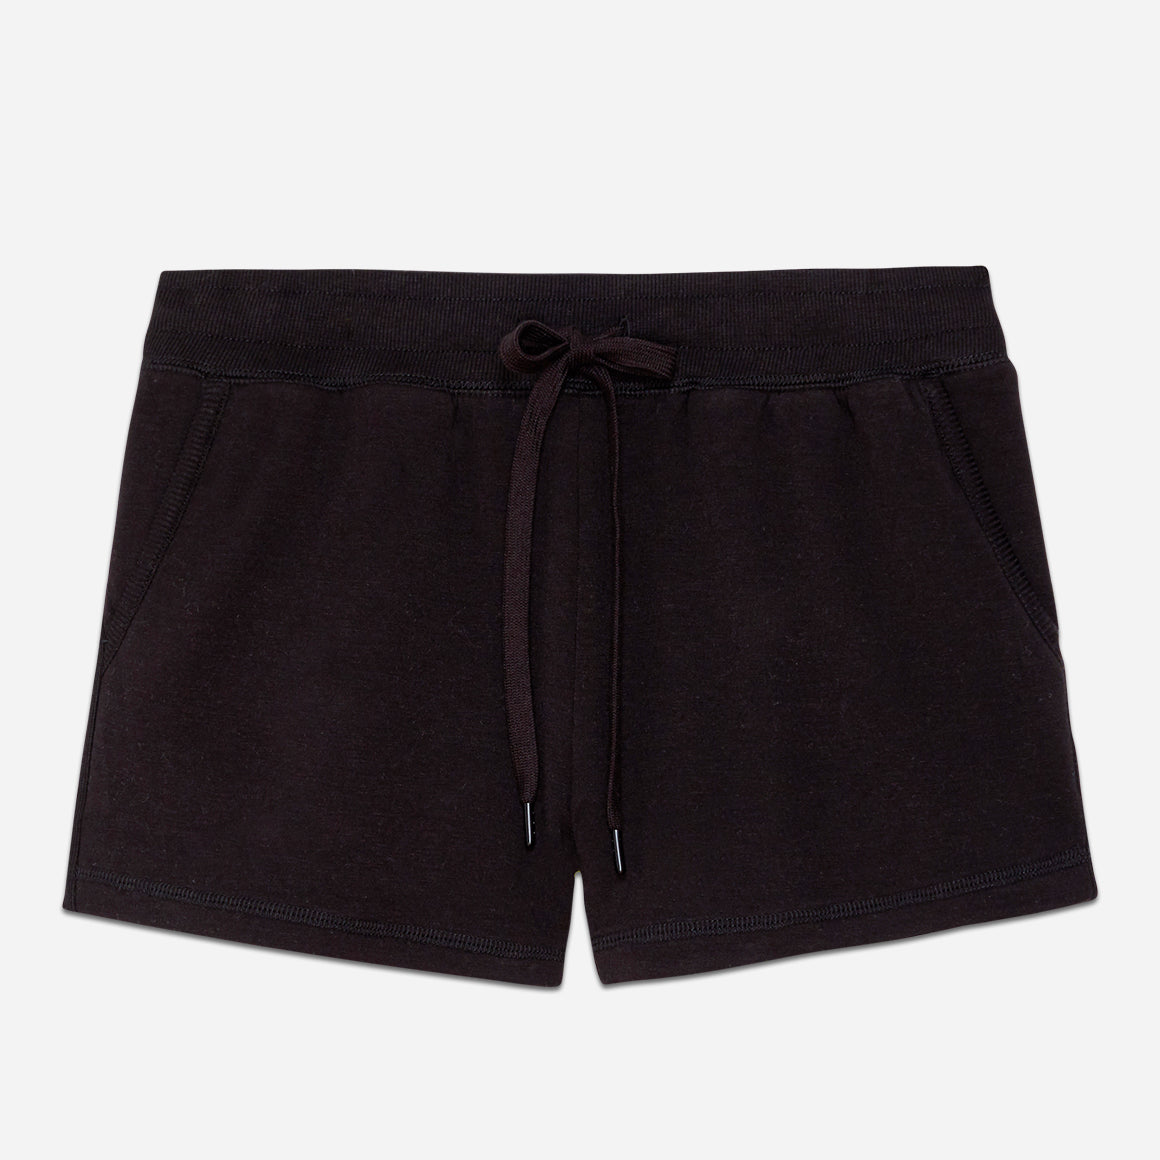 Crafted from a soft blend with a touch of stretch, this lounge short offers a sumptuously soft and lightweight feel against your skin. The breathable fabric ensures optimal airflow, keeping you cool and comfortable throughout the night or during cozy mornings at home. This pj short has a cozy fit that features side seam pockets and a comfortable elastic waistband with drawstring for a personalized fit, allowing you to move freely and unrestricted.